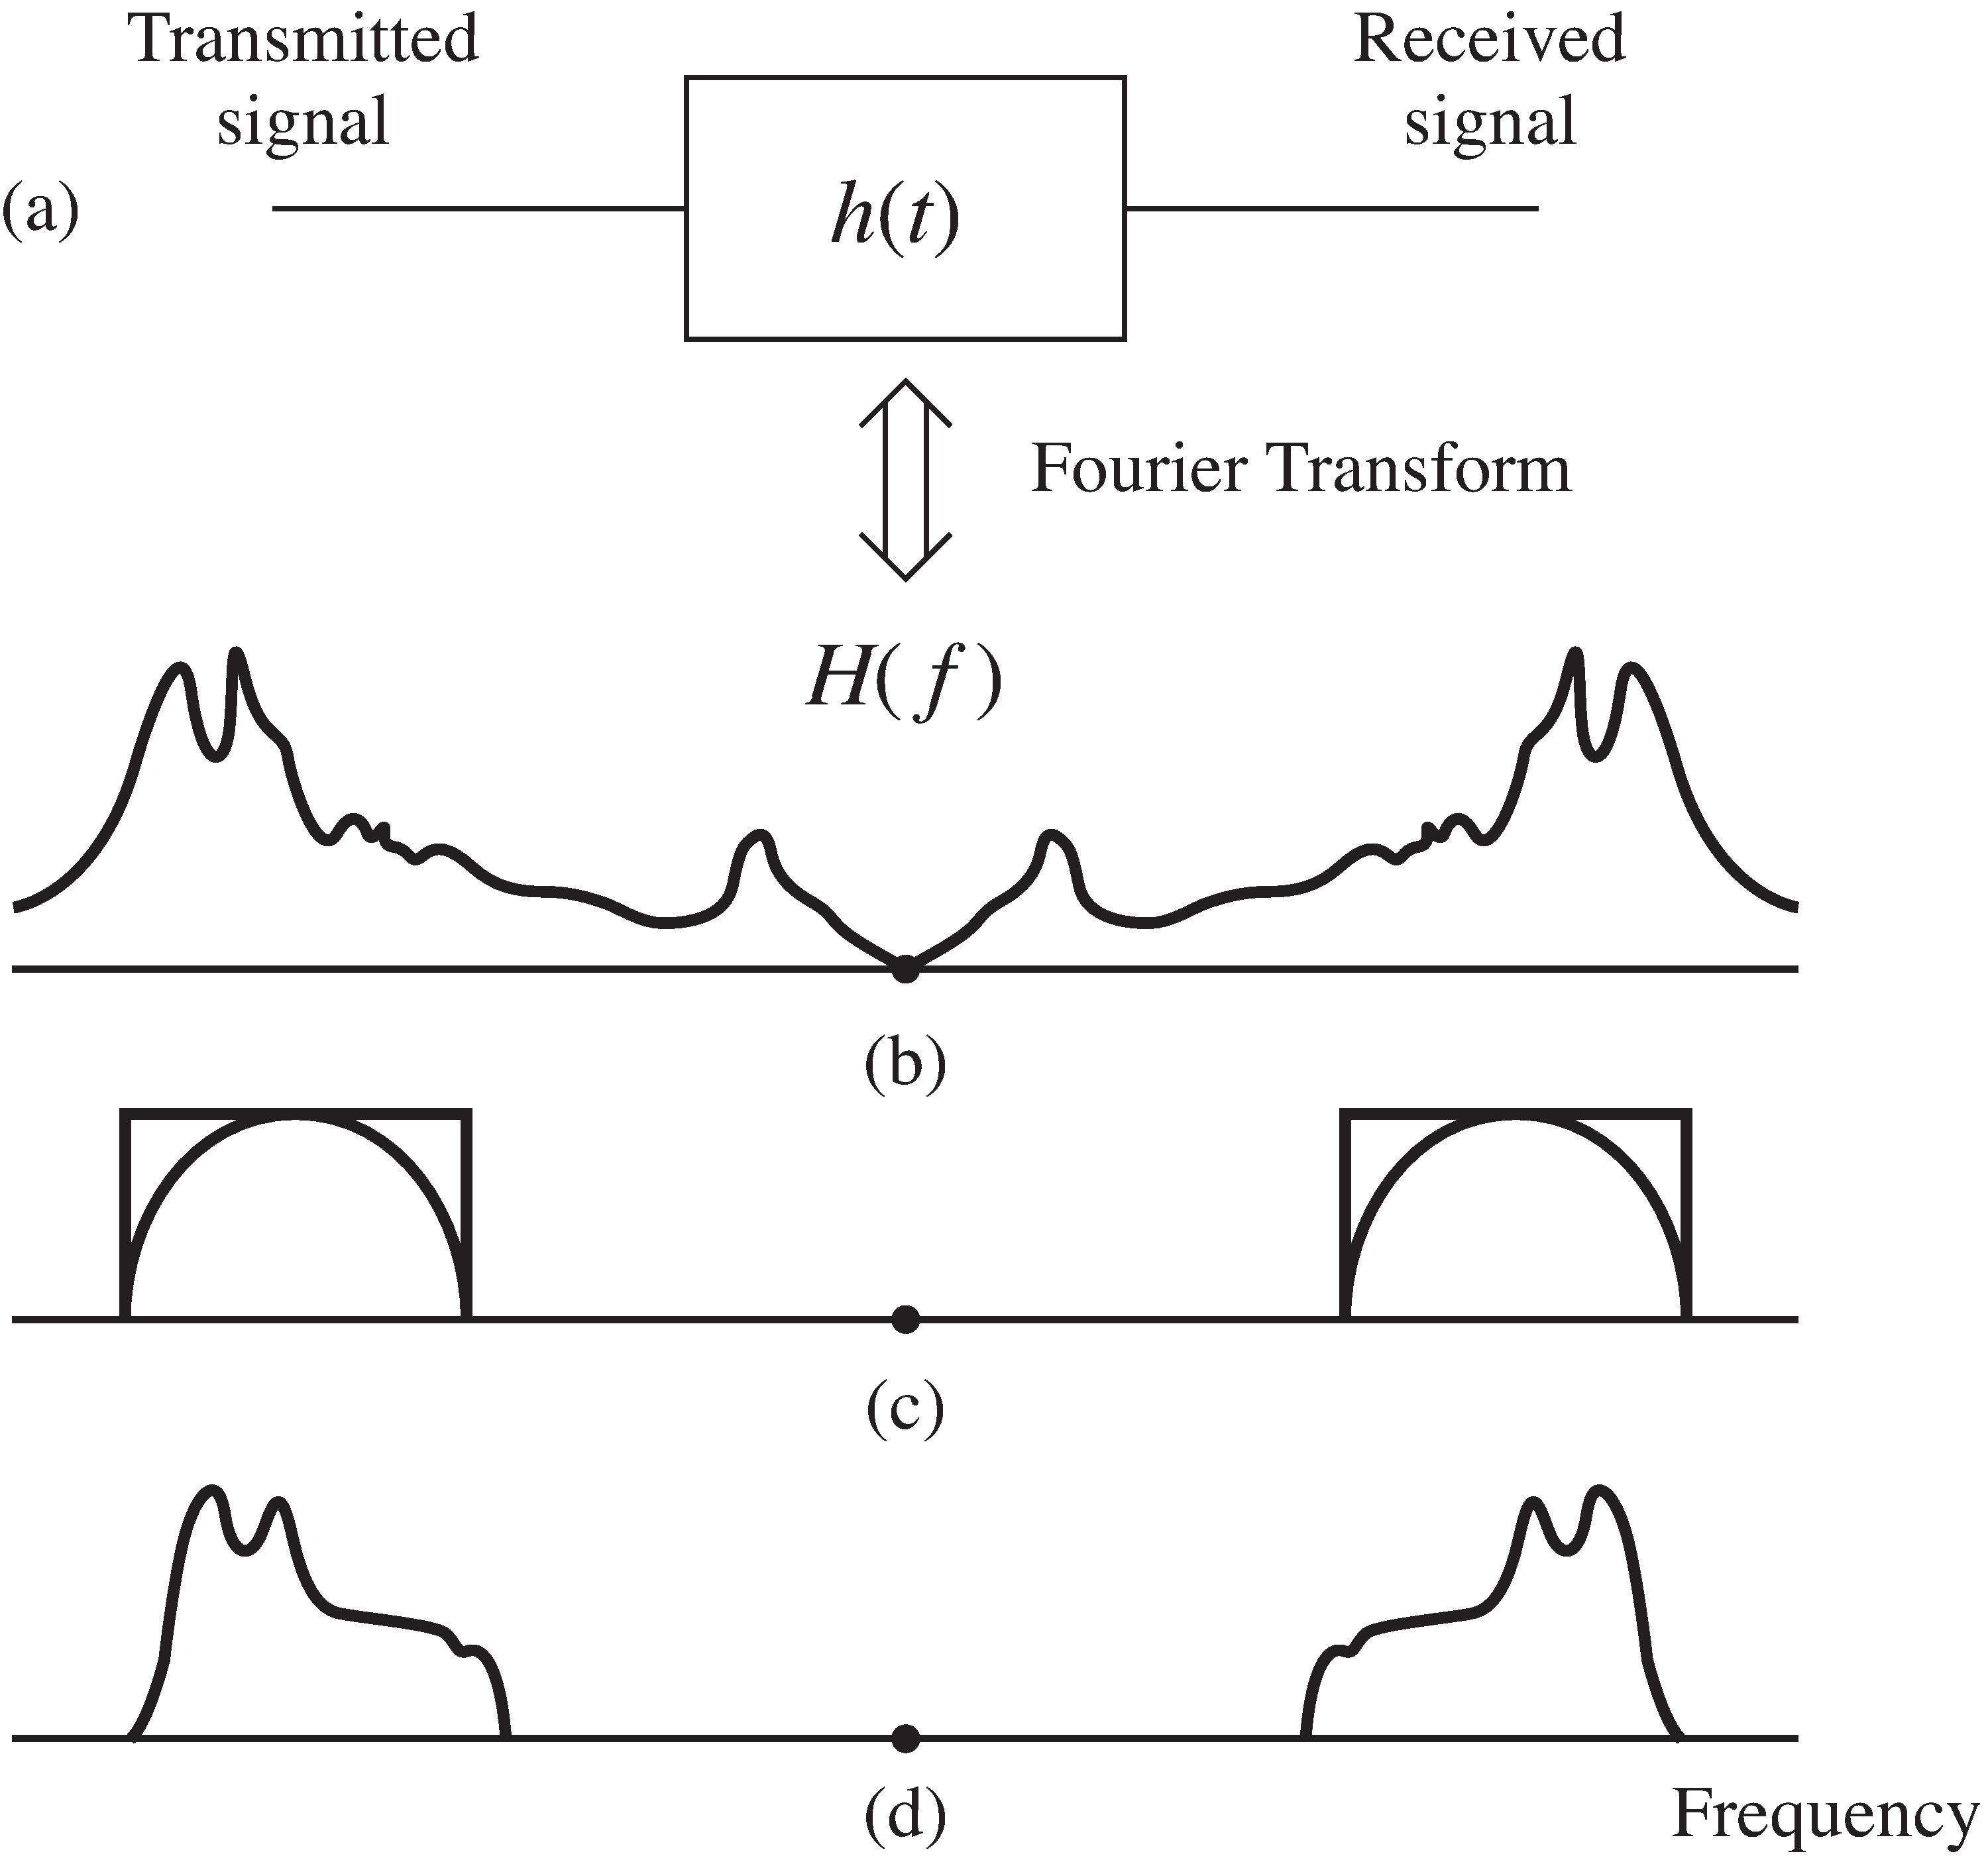 (a) The channel model Equation 4 as a filter. (b) The frequency response of the filter. (c) An idealized BPF and the spectrum of the signal. The product of (b) and (c) gives (d), the distorted spectrum at the receiver.